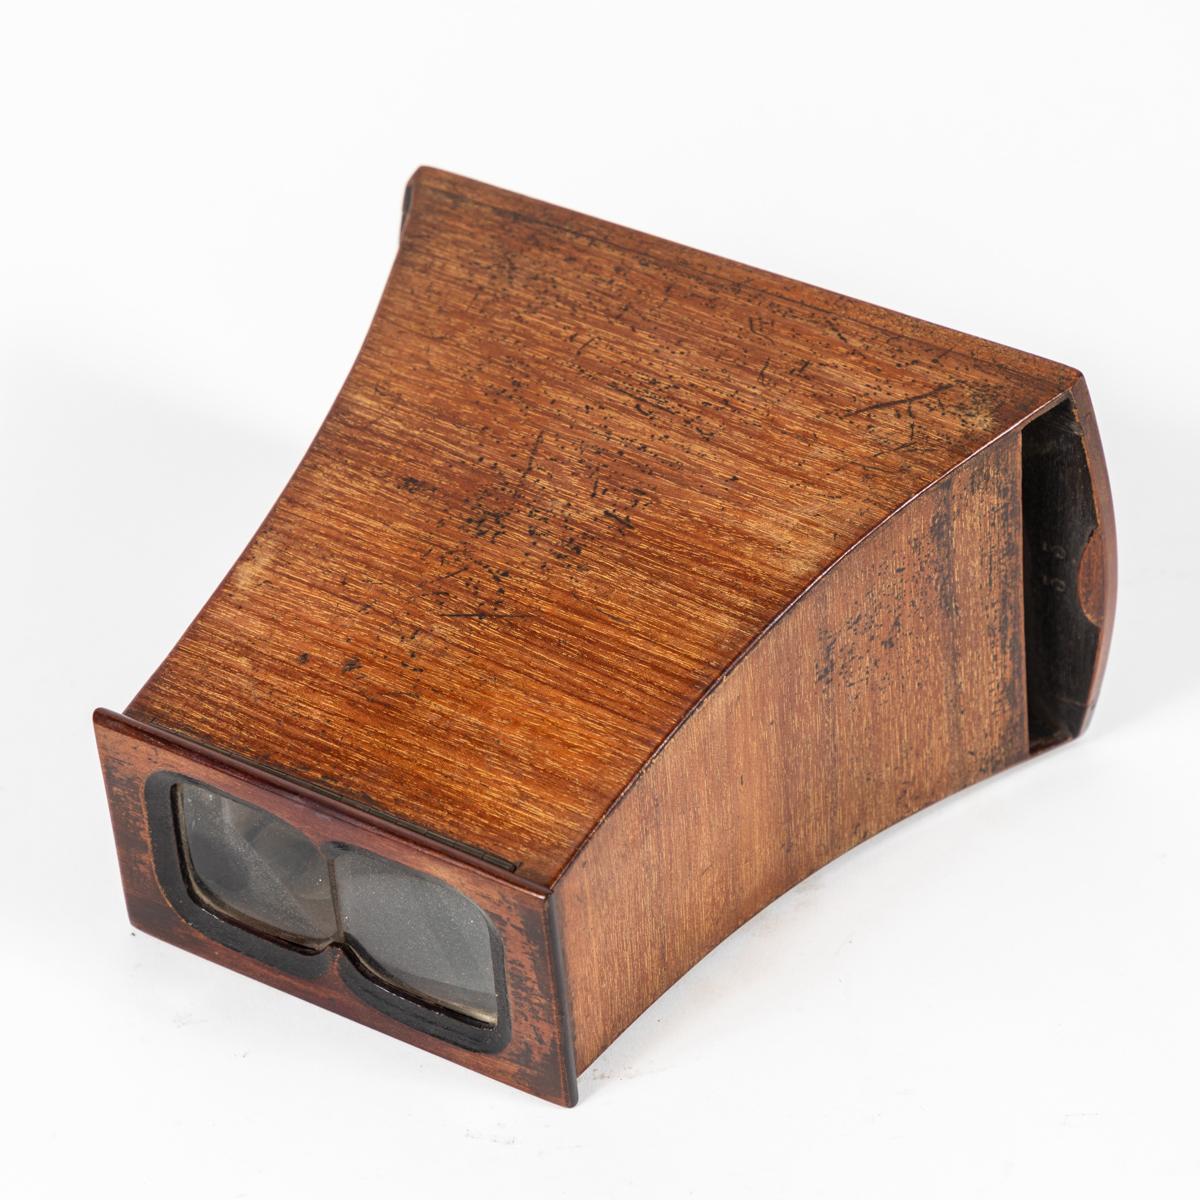 Glass Vintage Wood Stereoscope with Sepia Toned Cards from Late 19th Century, England For Sale